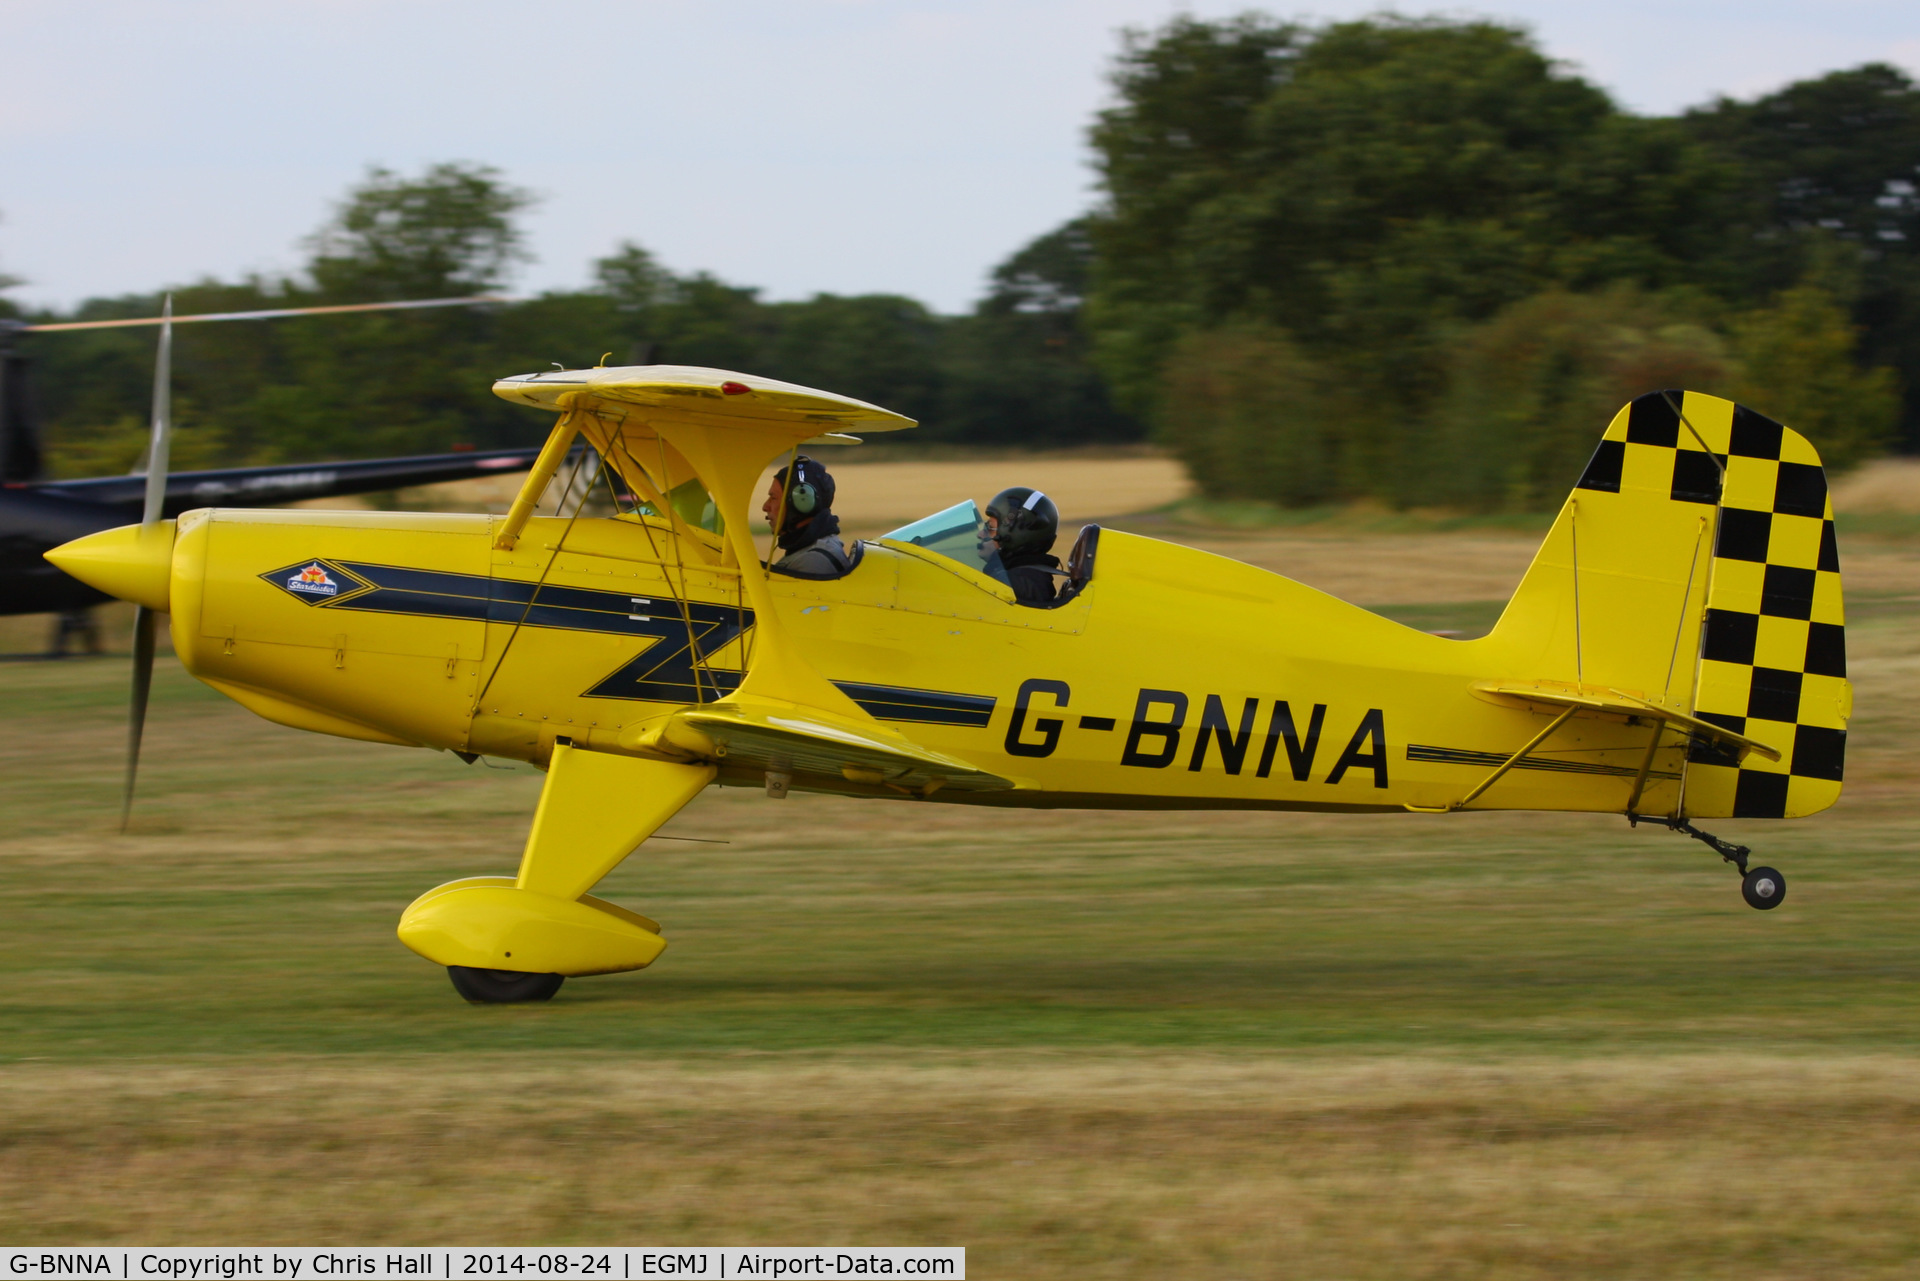 G-BNNA, 1973 Stolp SA-300 Starduster Too C/N 1462, at the Little Gransden Airshow 2014